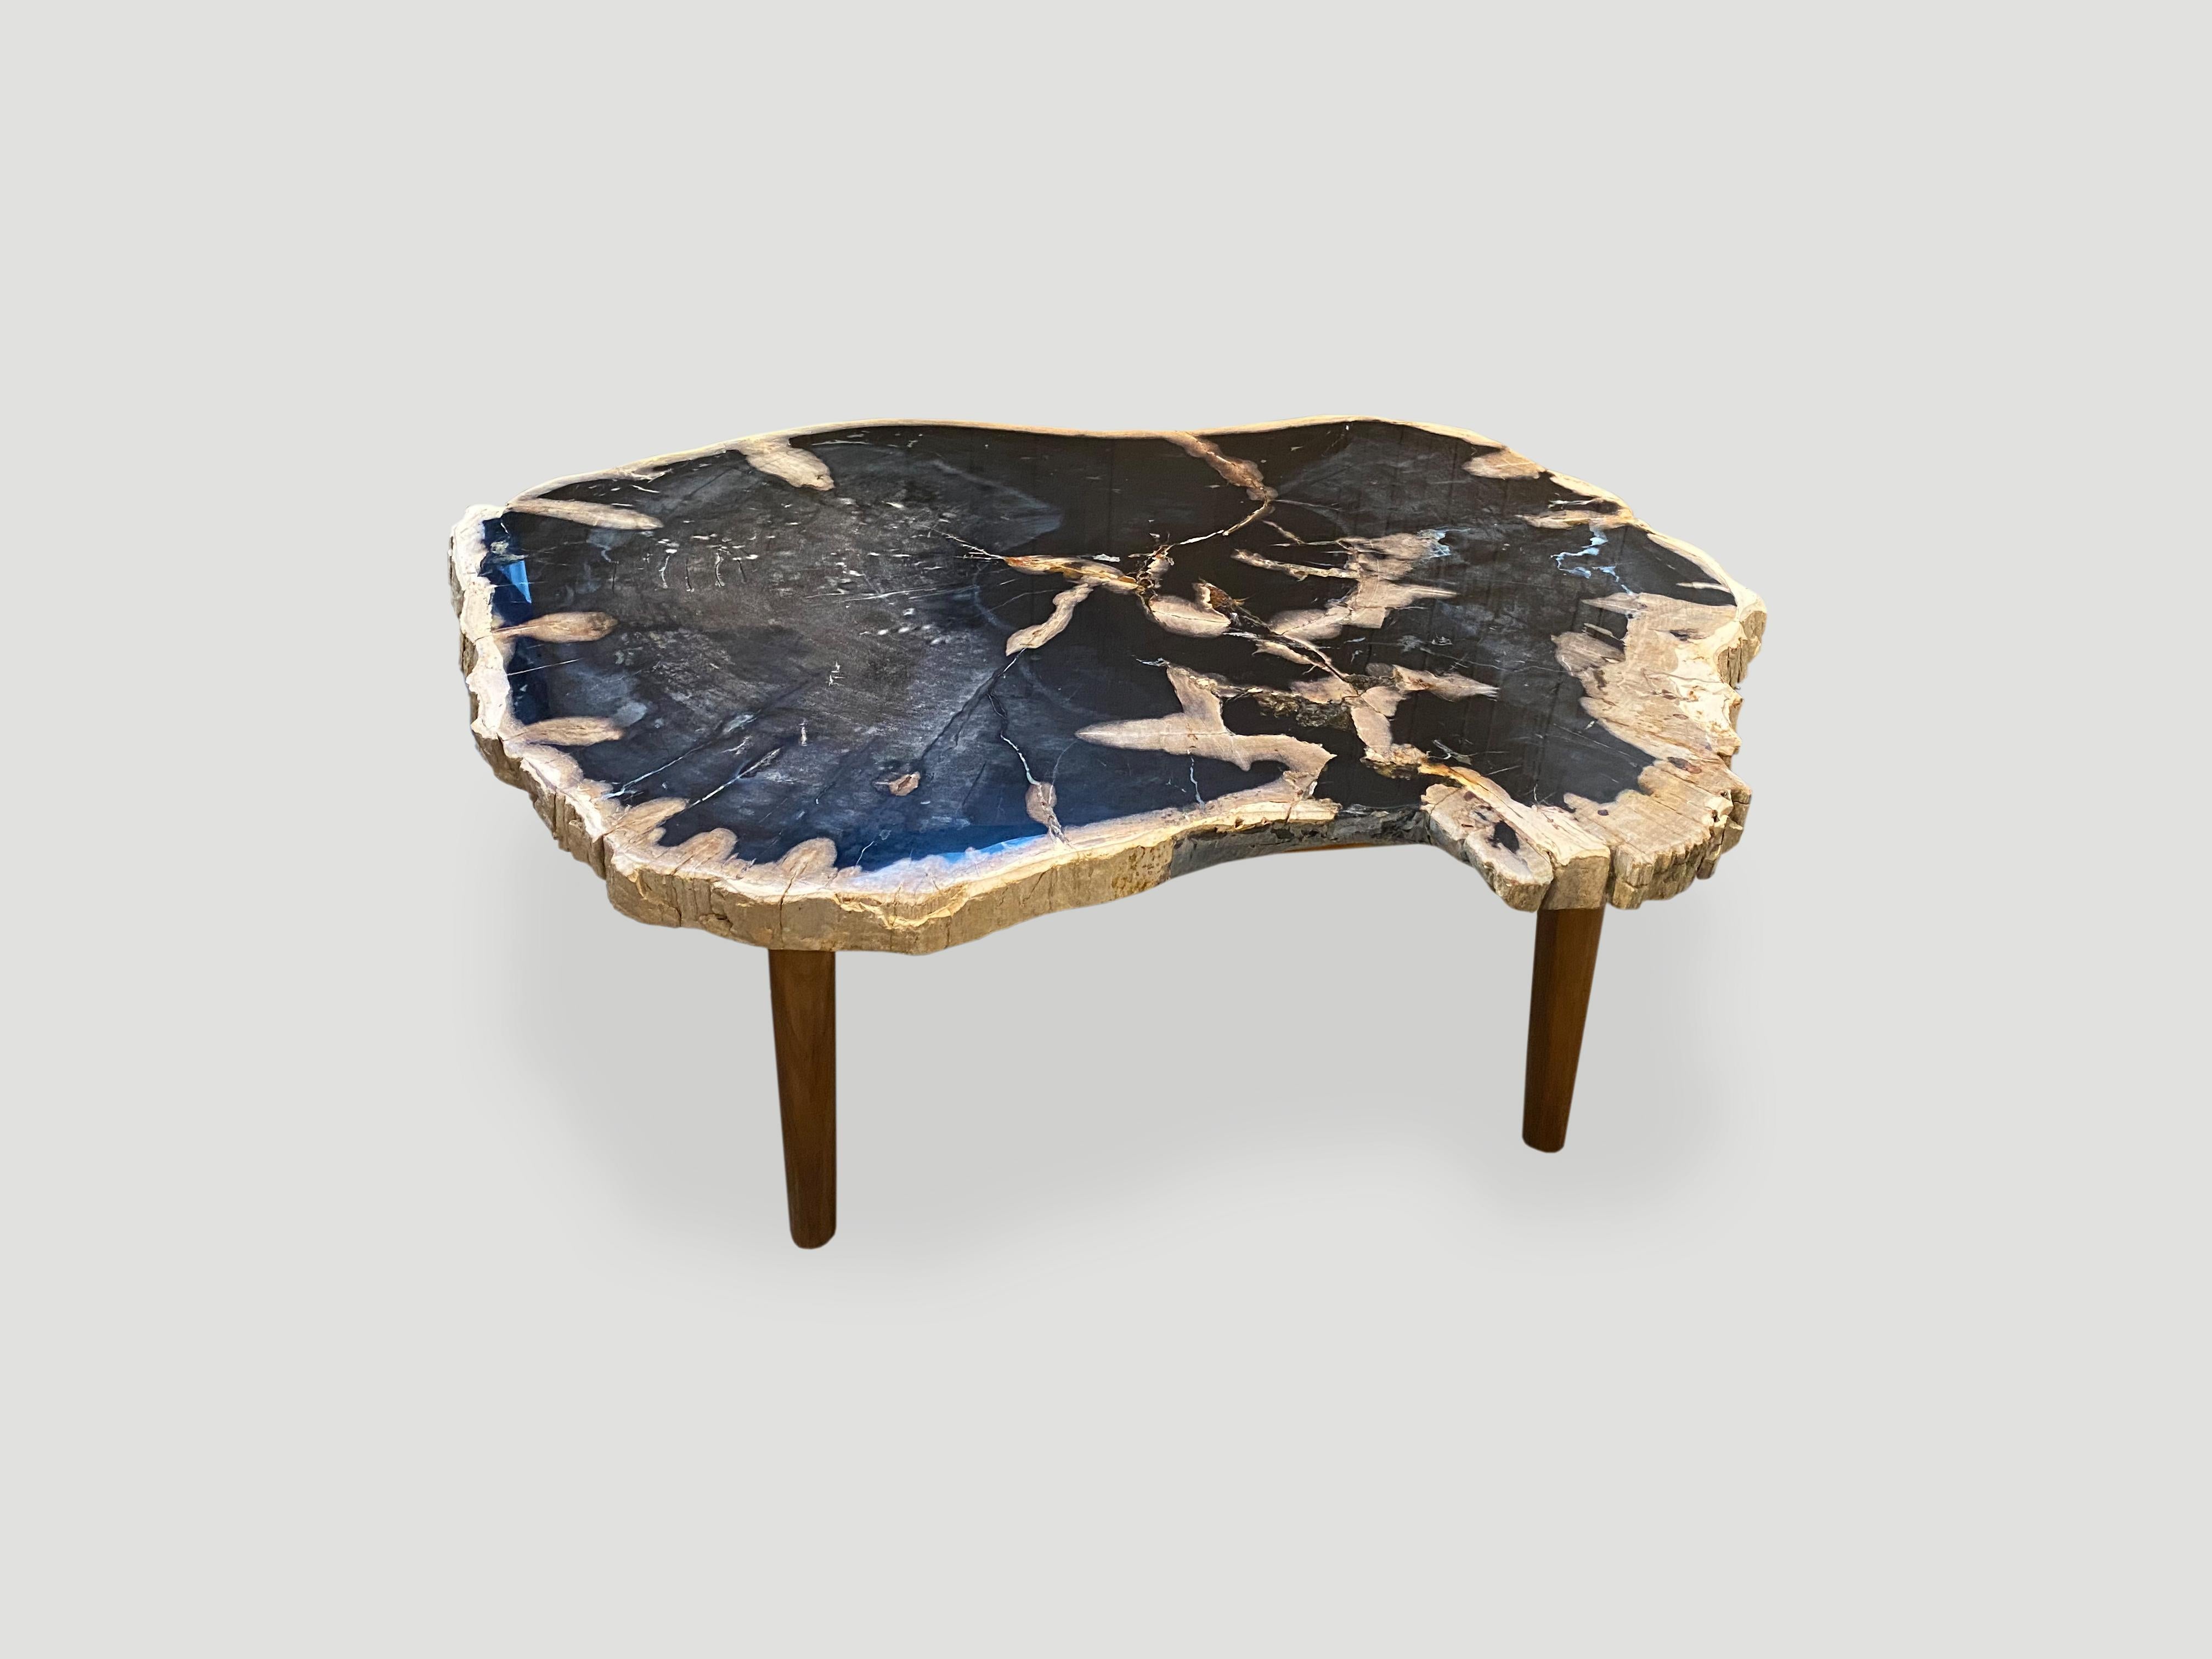 Andrianna Shamaris High Quality Petrified Wood Coffee Table with Teak Wood Base In Excellent Condition For Sale In New York, NY